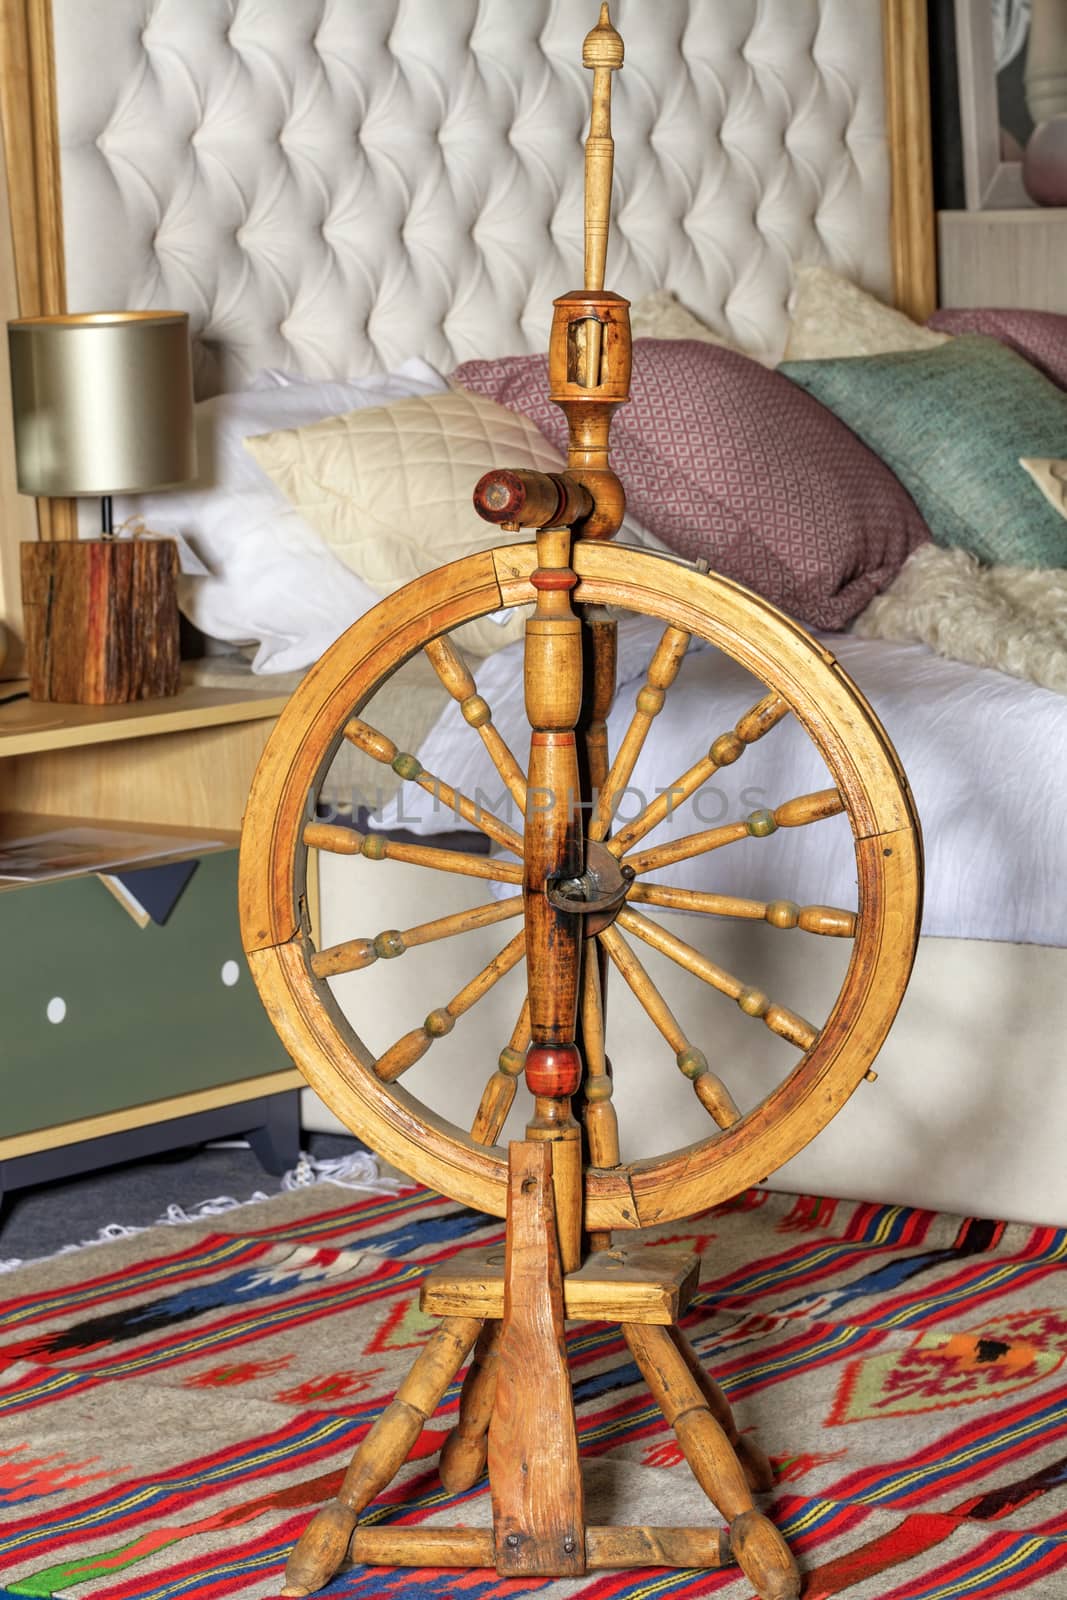 An antique spinning wheel stands on a homespun carpet at the head of the bed. by Sergii